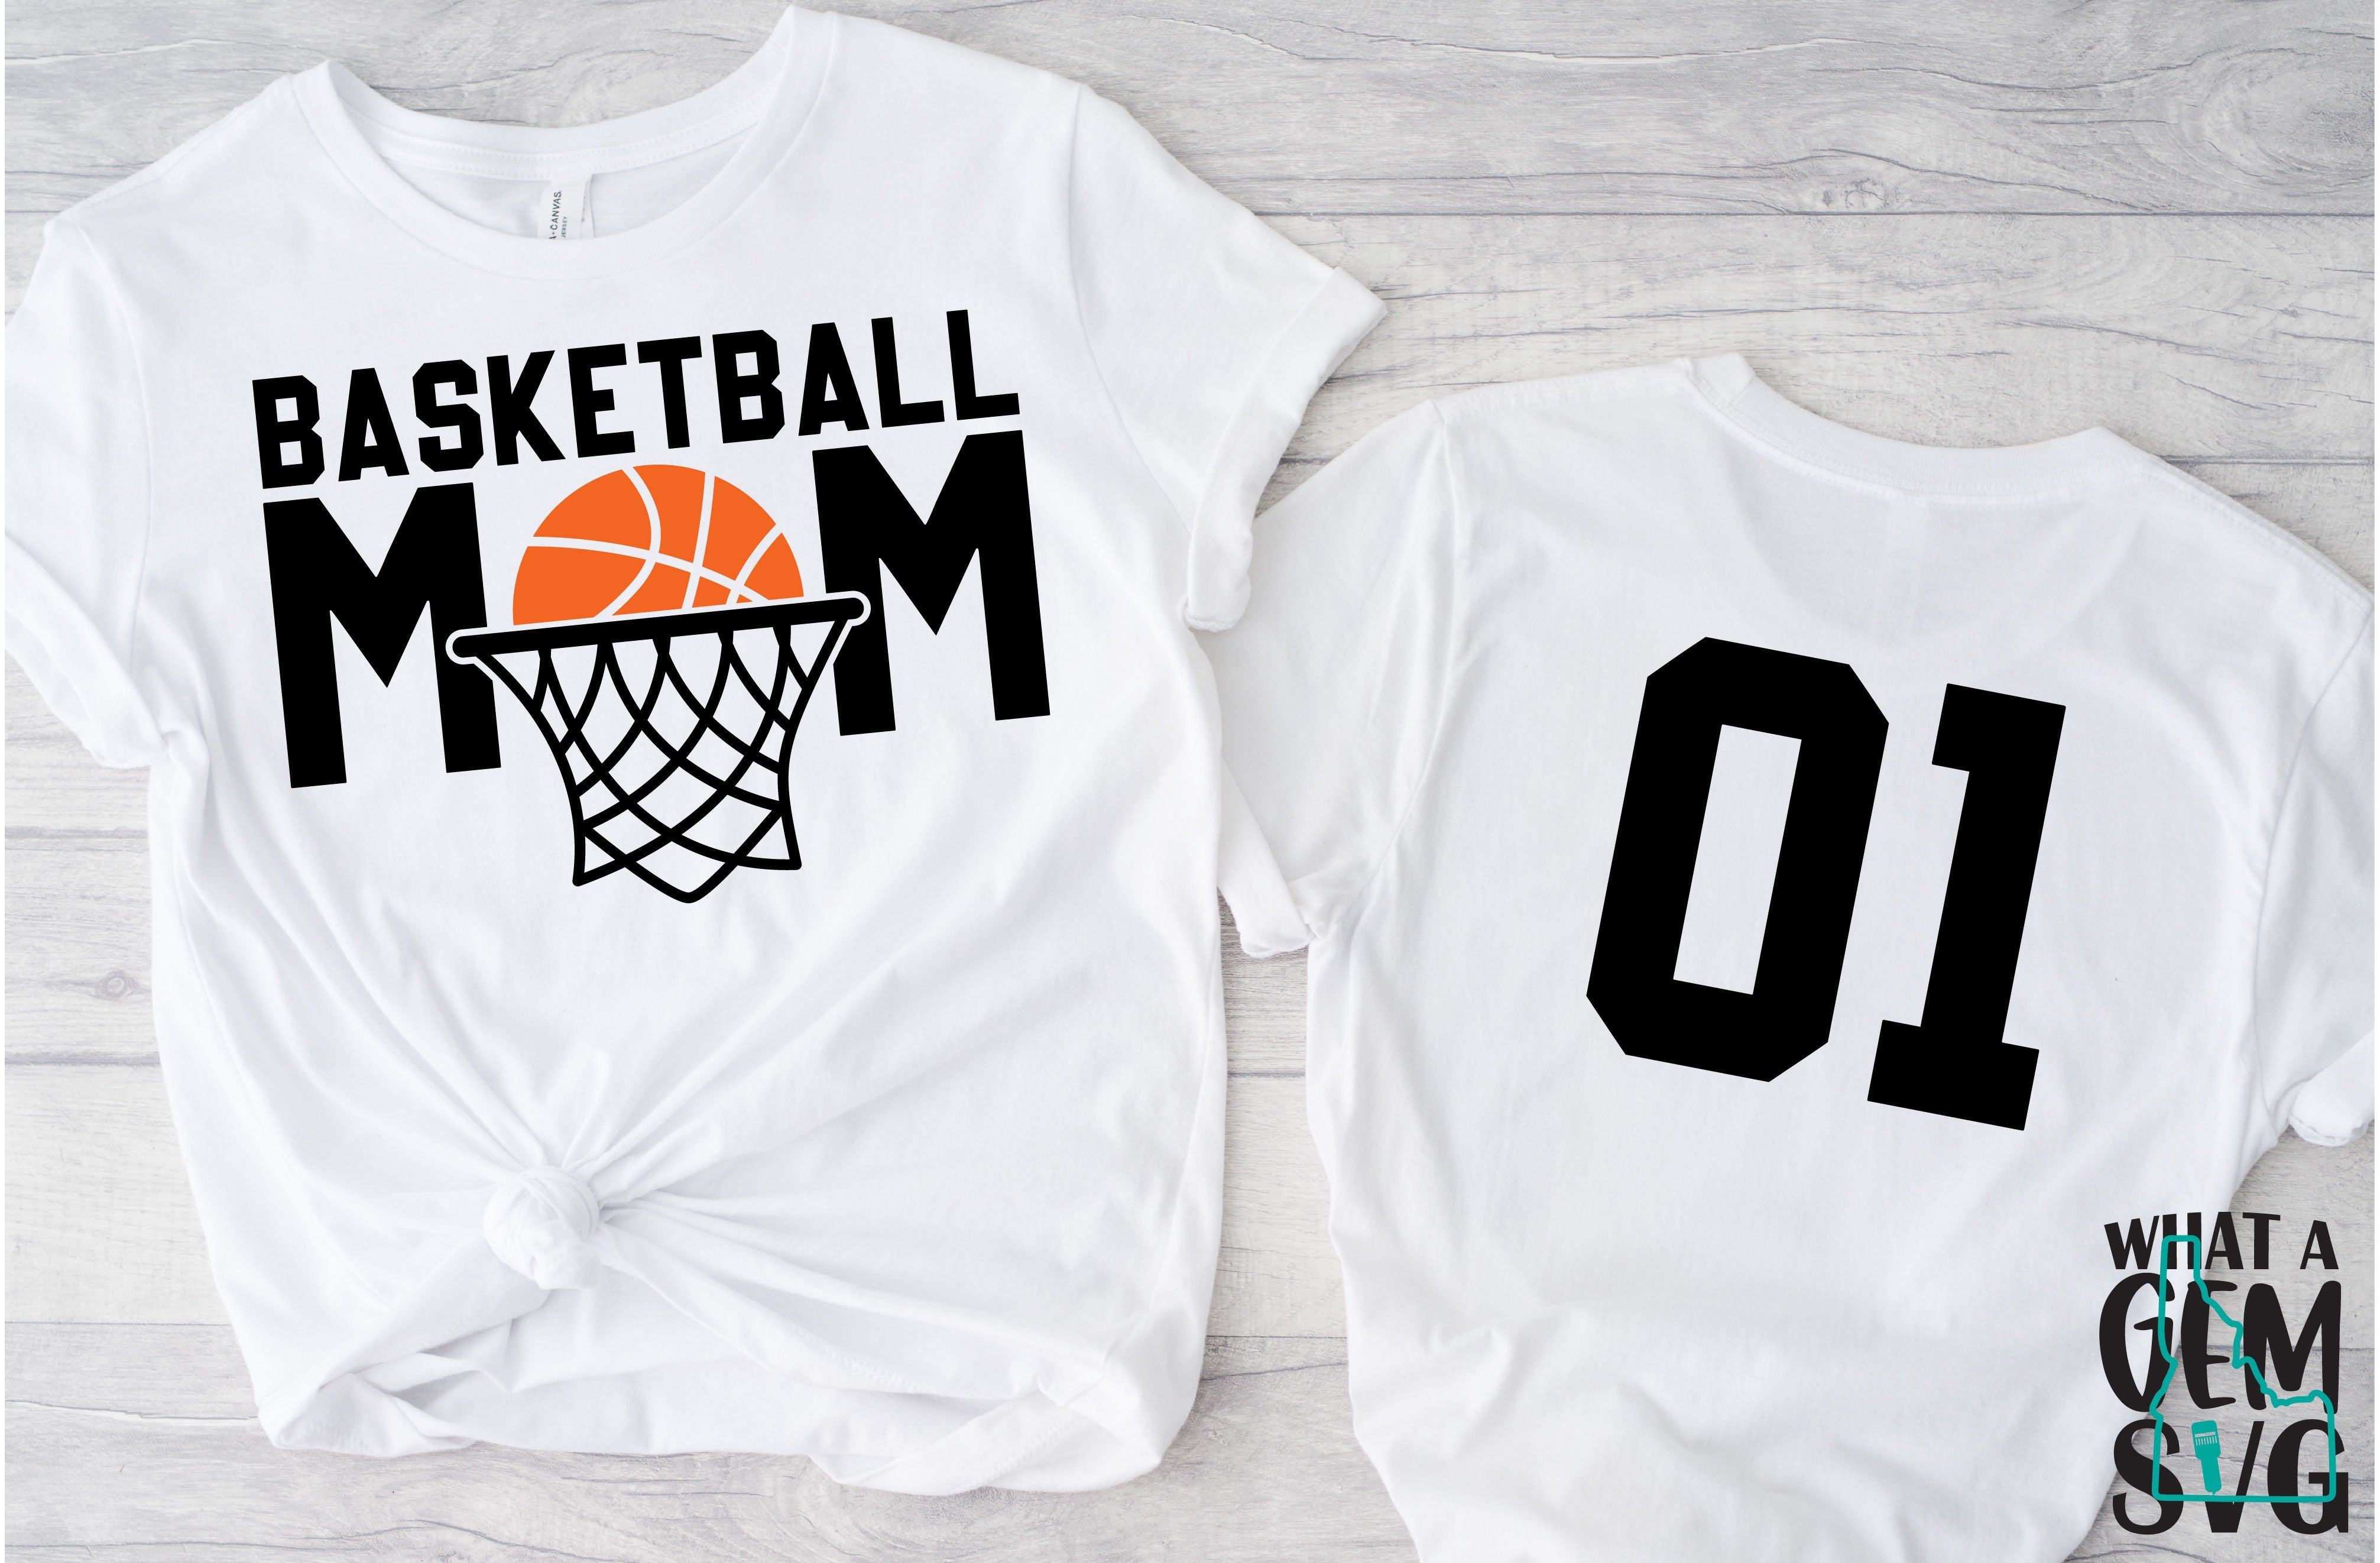 Basketball Clipart-basketball jersey front and back clipart